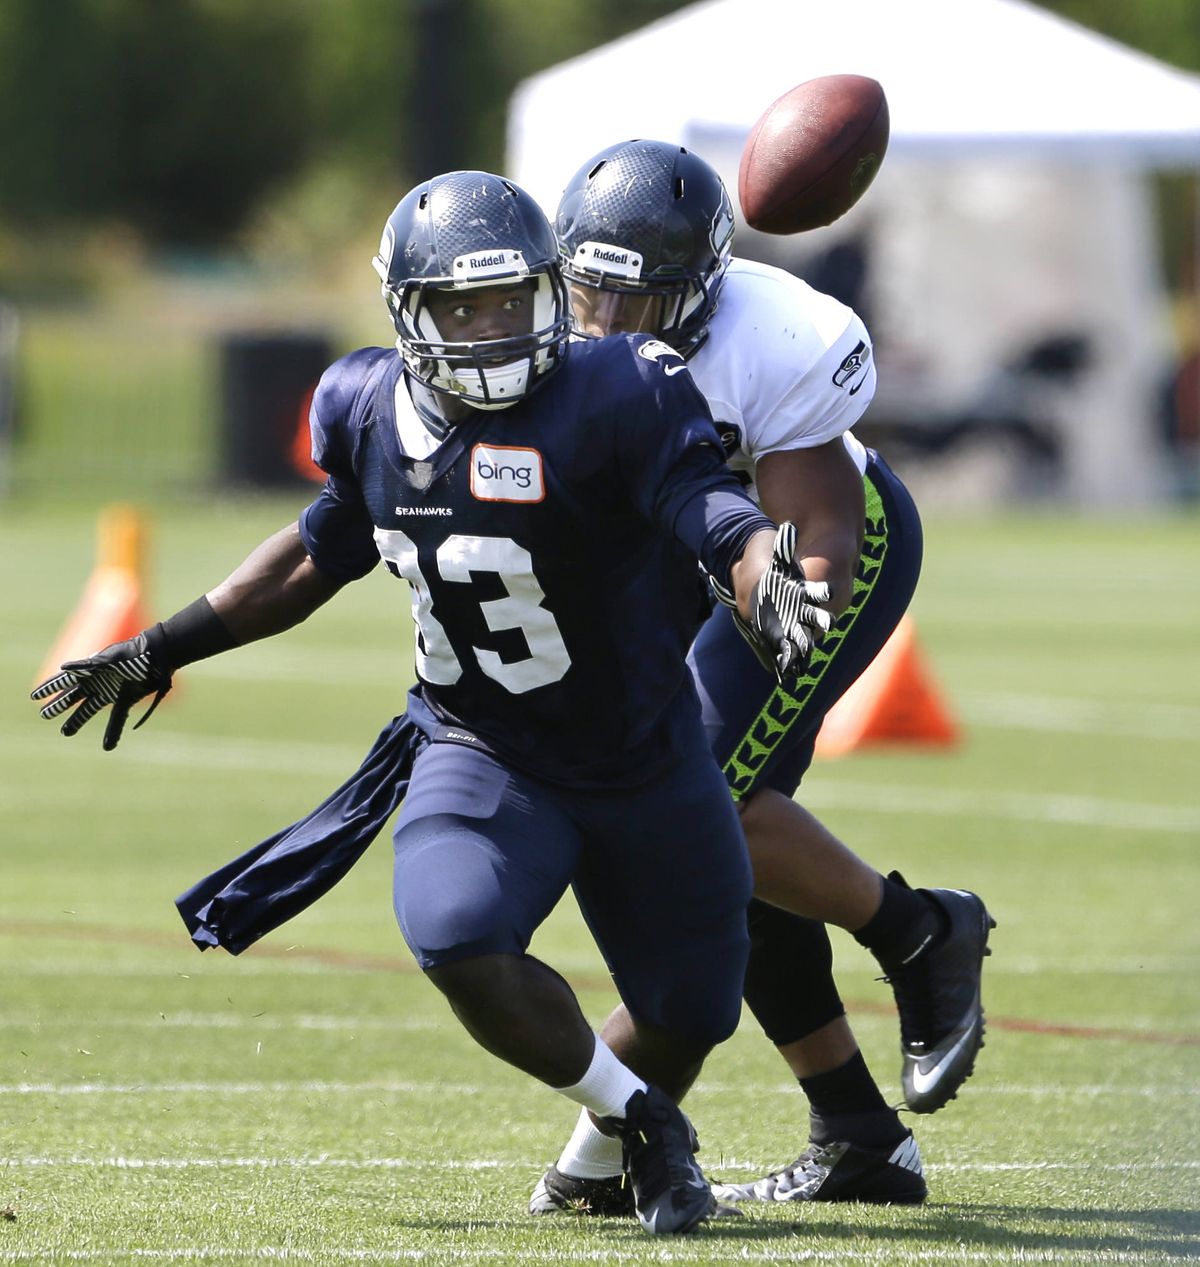 Christine Michael looks to impress at running back. (Associated Press)